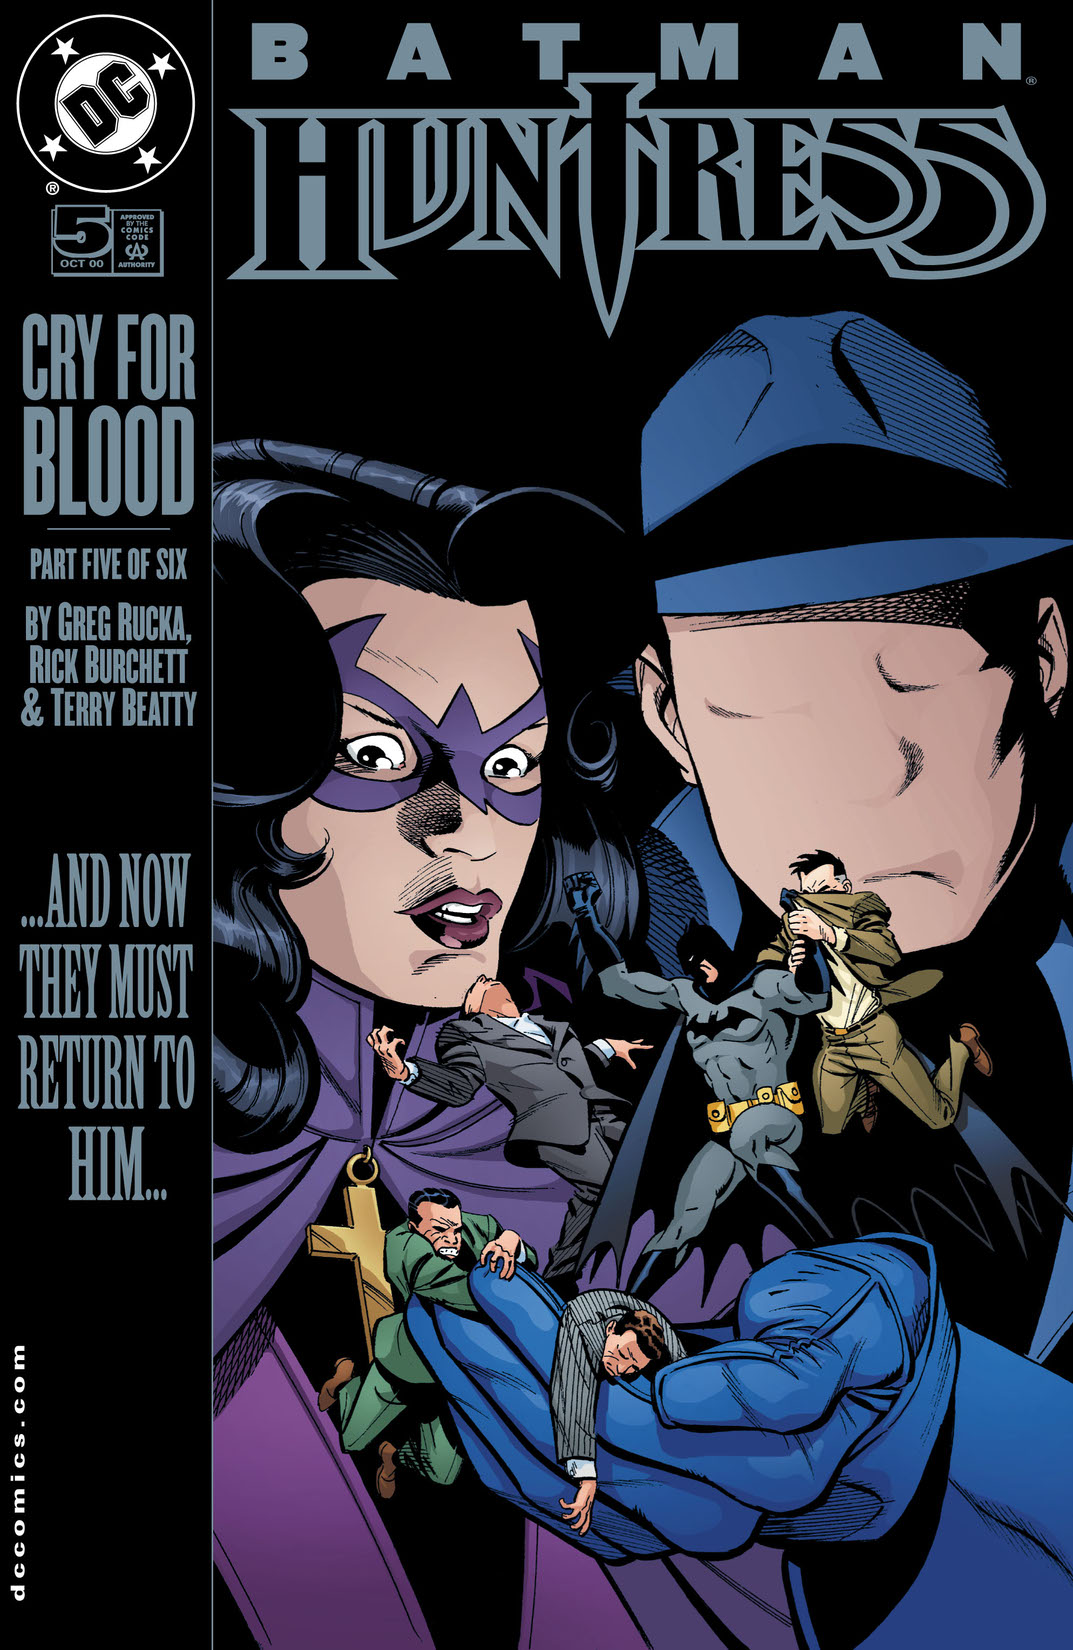 Batman/Huntress: Cry for Blood #5 preview images